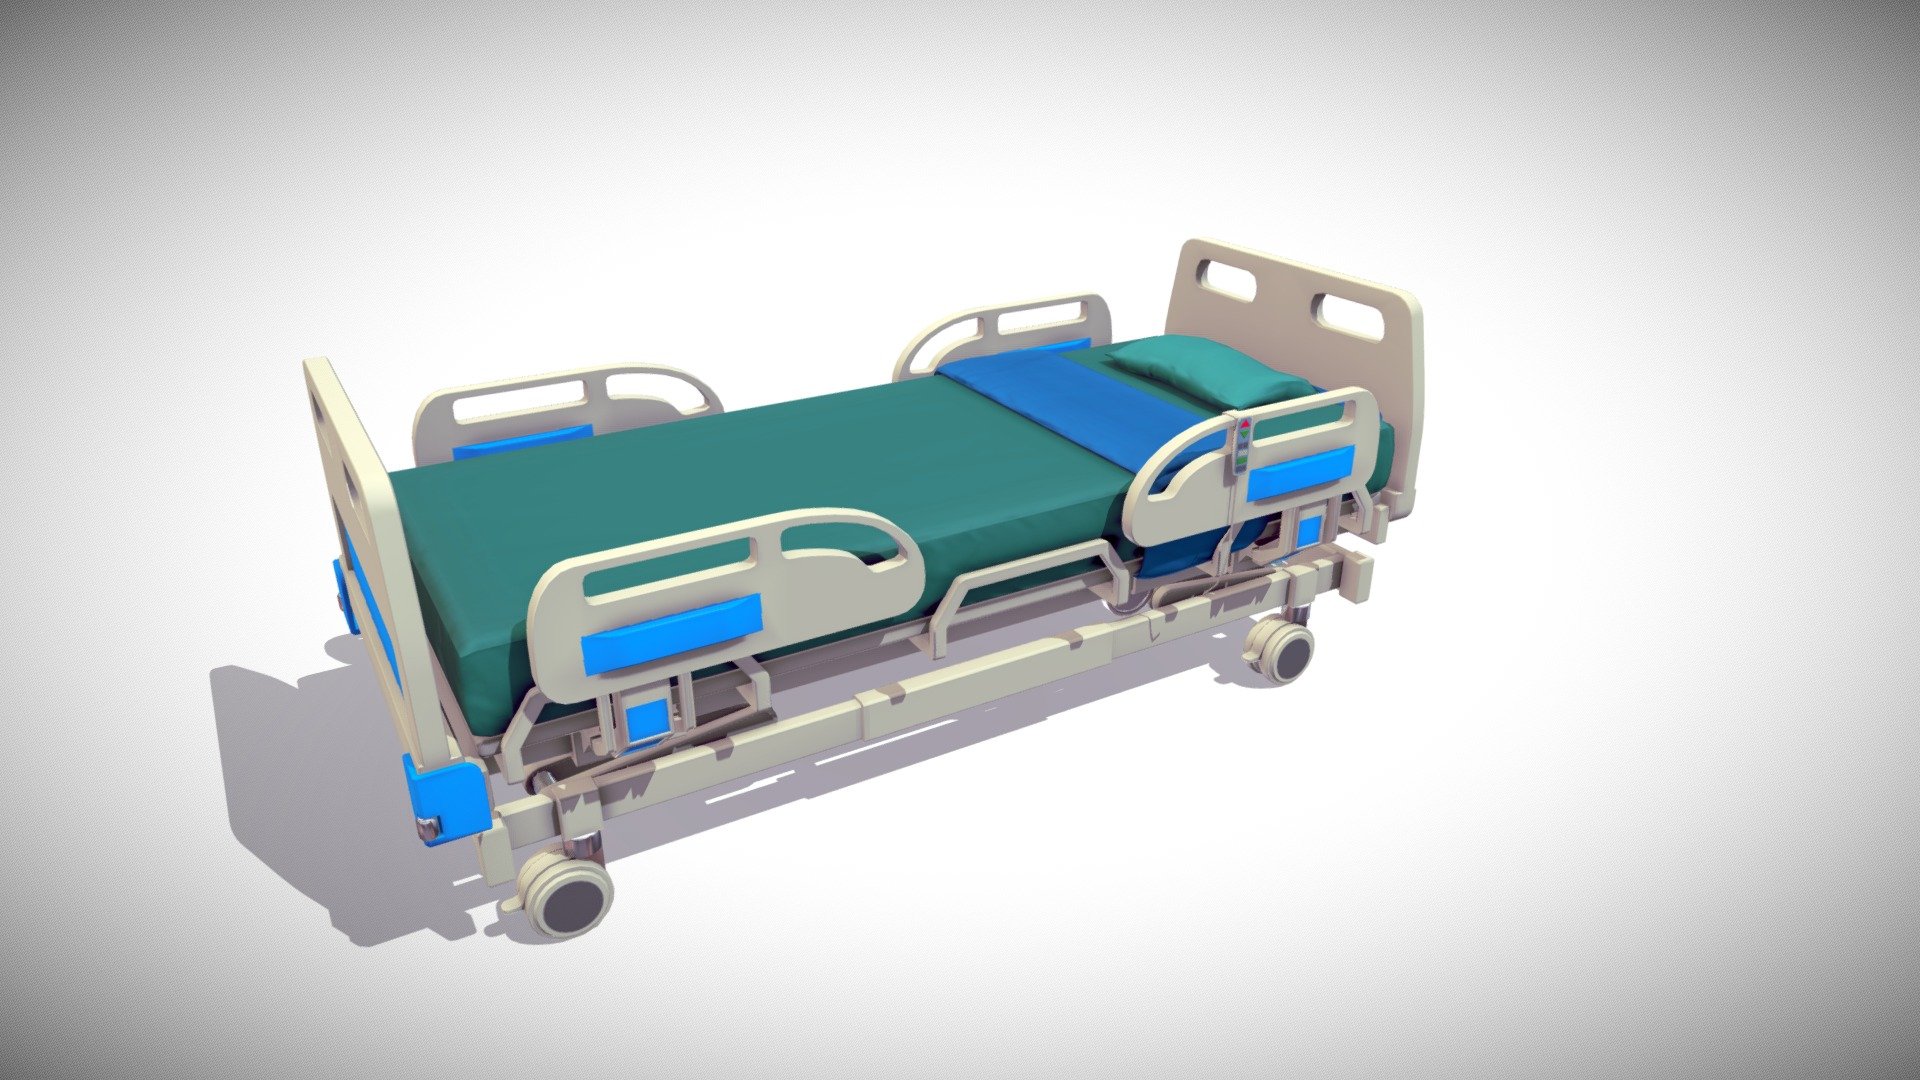 A highly detalied Low Poly Hospital Bed model.

Model is fully unwrapped. 

The geometry is clean, built mostly on quads, with no N-gons, no coplanar faces, no coincident or isolated vertices. 

The textures size is 2048x2048 pixels.

If you need this product in a different format, please contact support for a free conversion.

The model uses real world scale 3d model